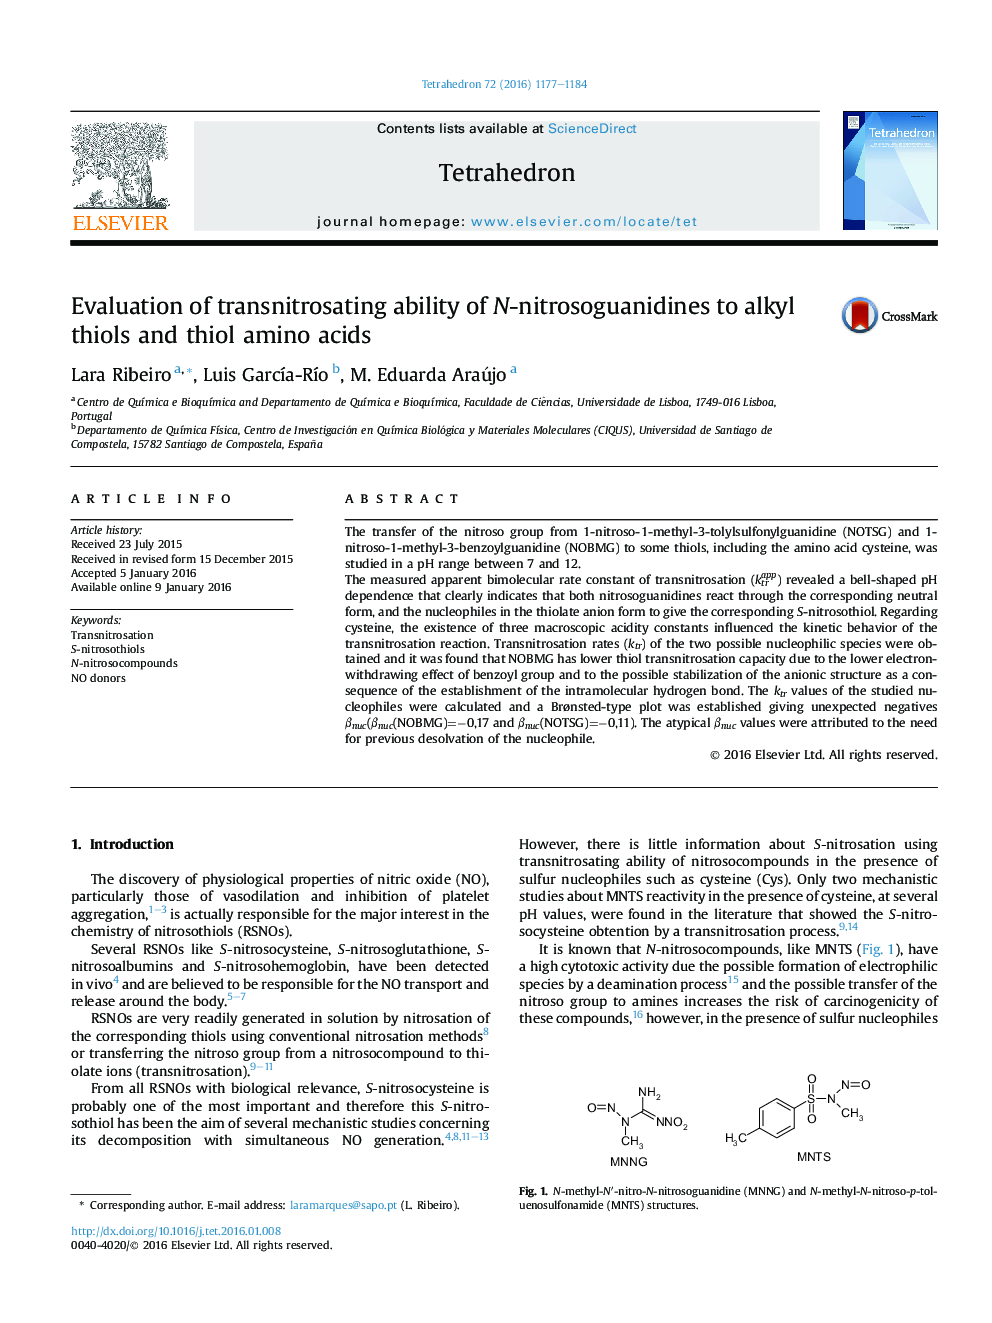 Evaluation of transnitrosating ability of N-nitrosoguanidines to alkyl thiols and thiol amino acids